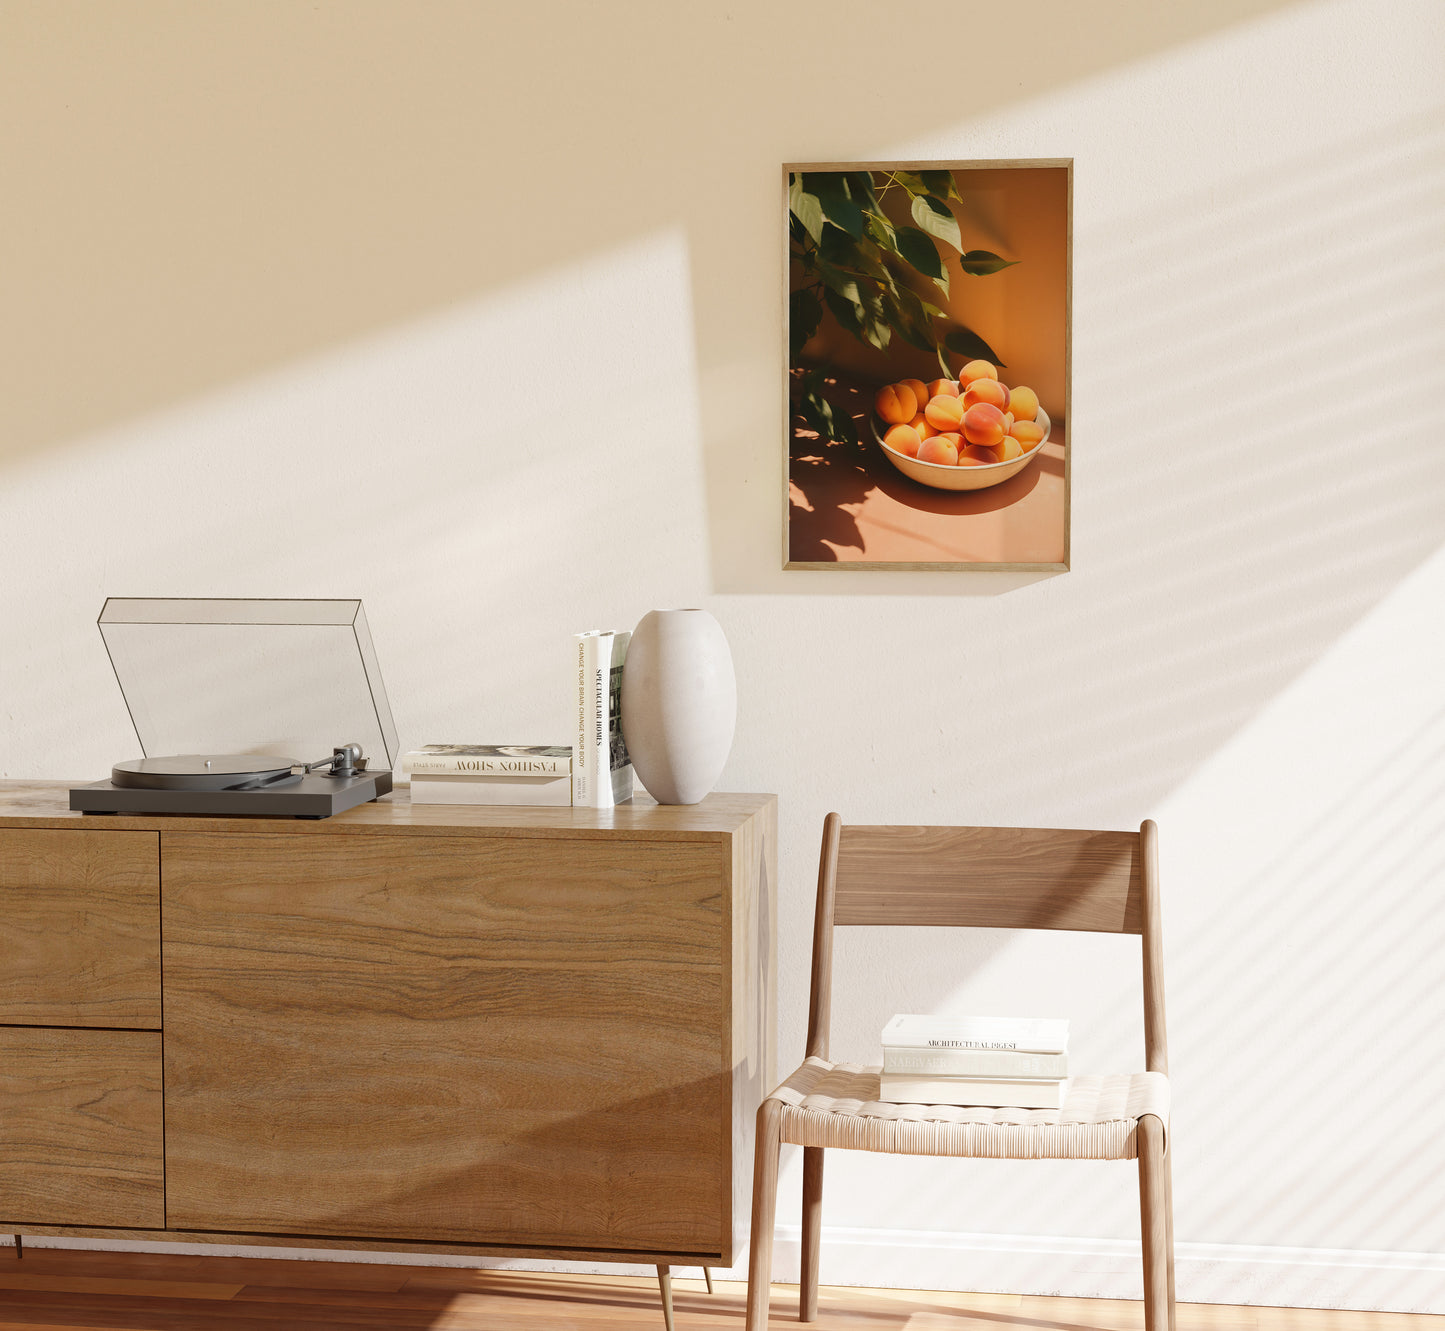 A cozy room corner with a wooden cabinet, record player, chair, and framed art of fruit on the wall.